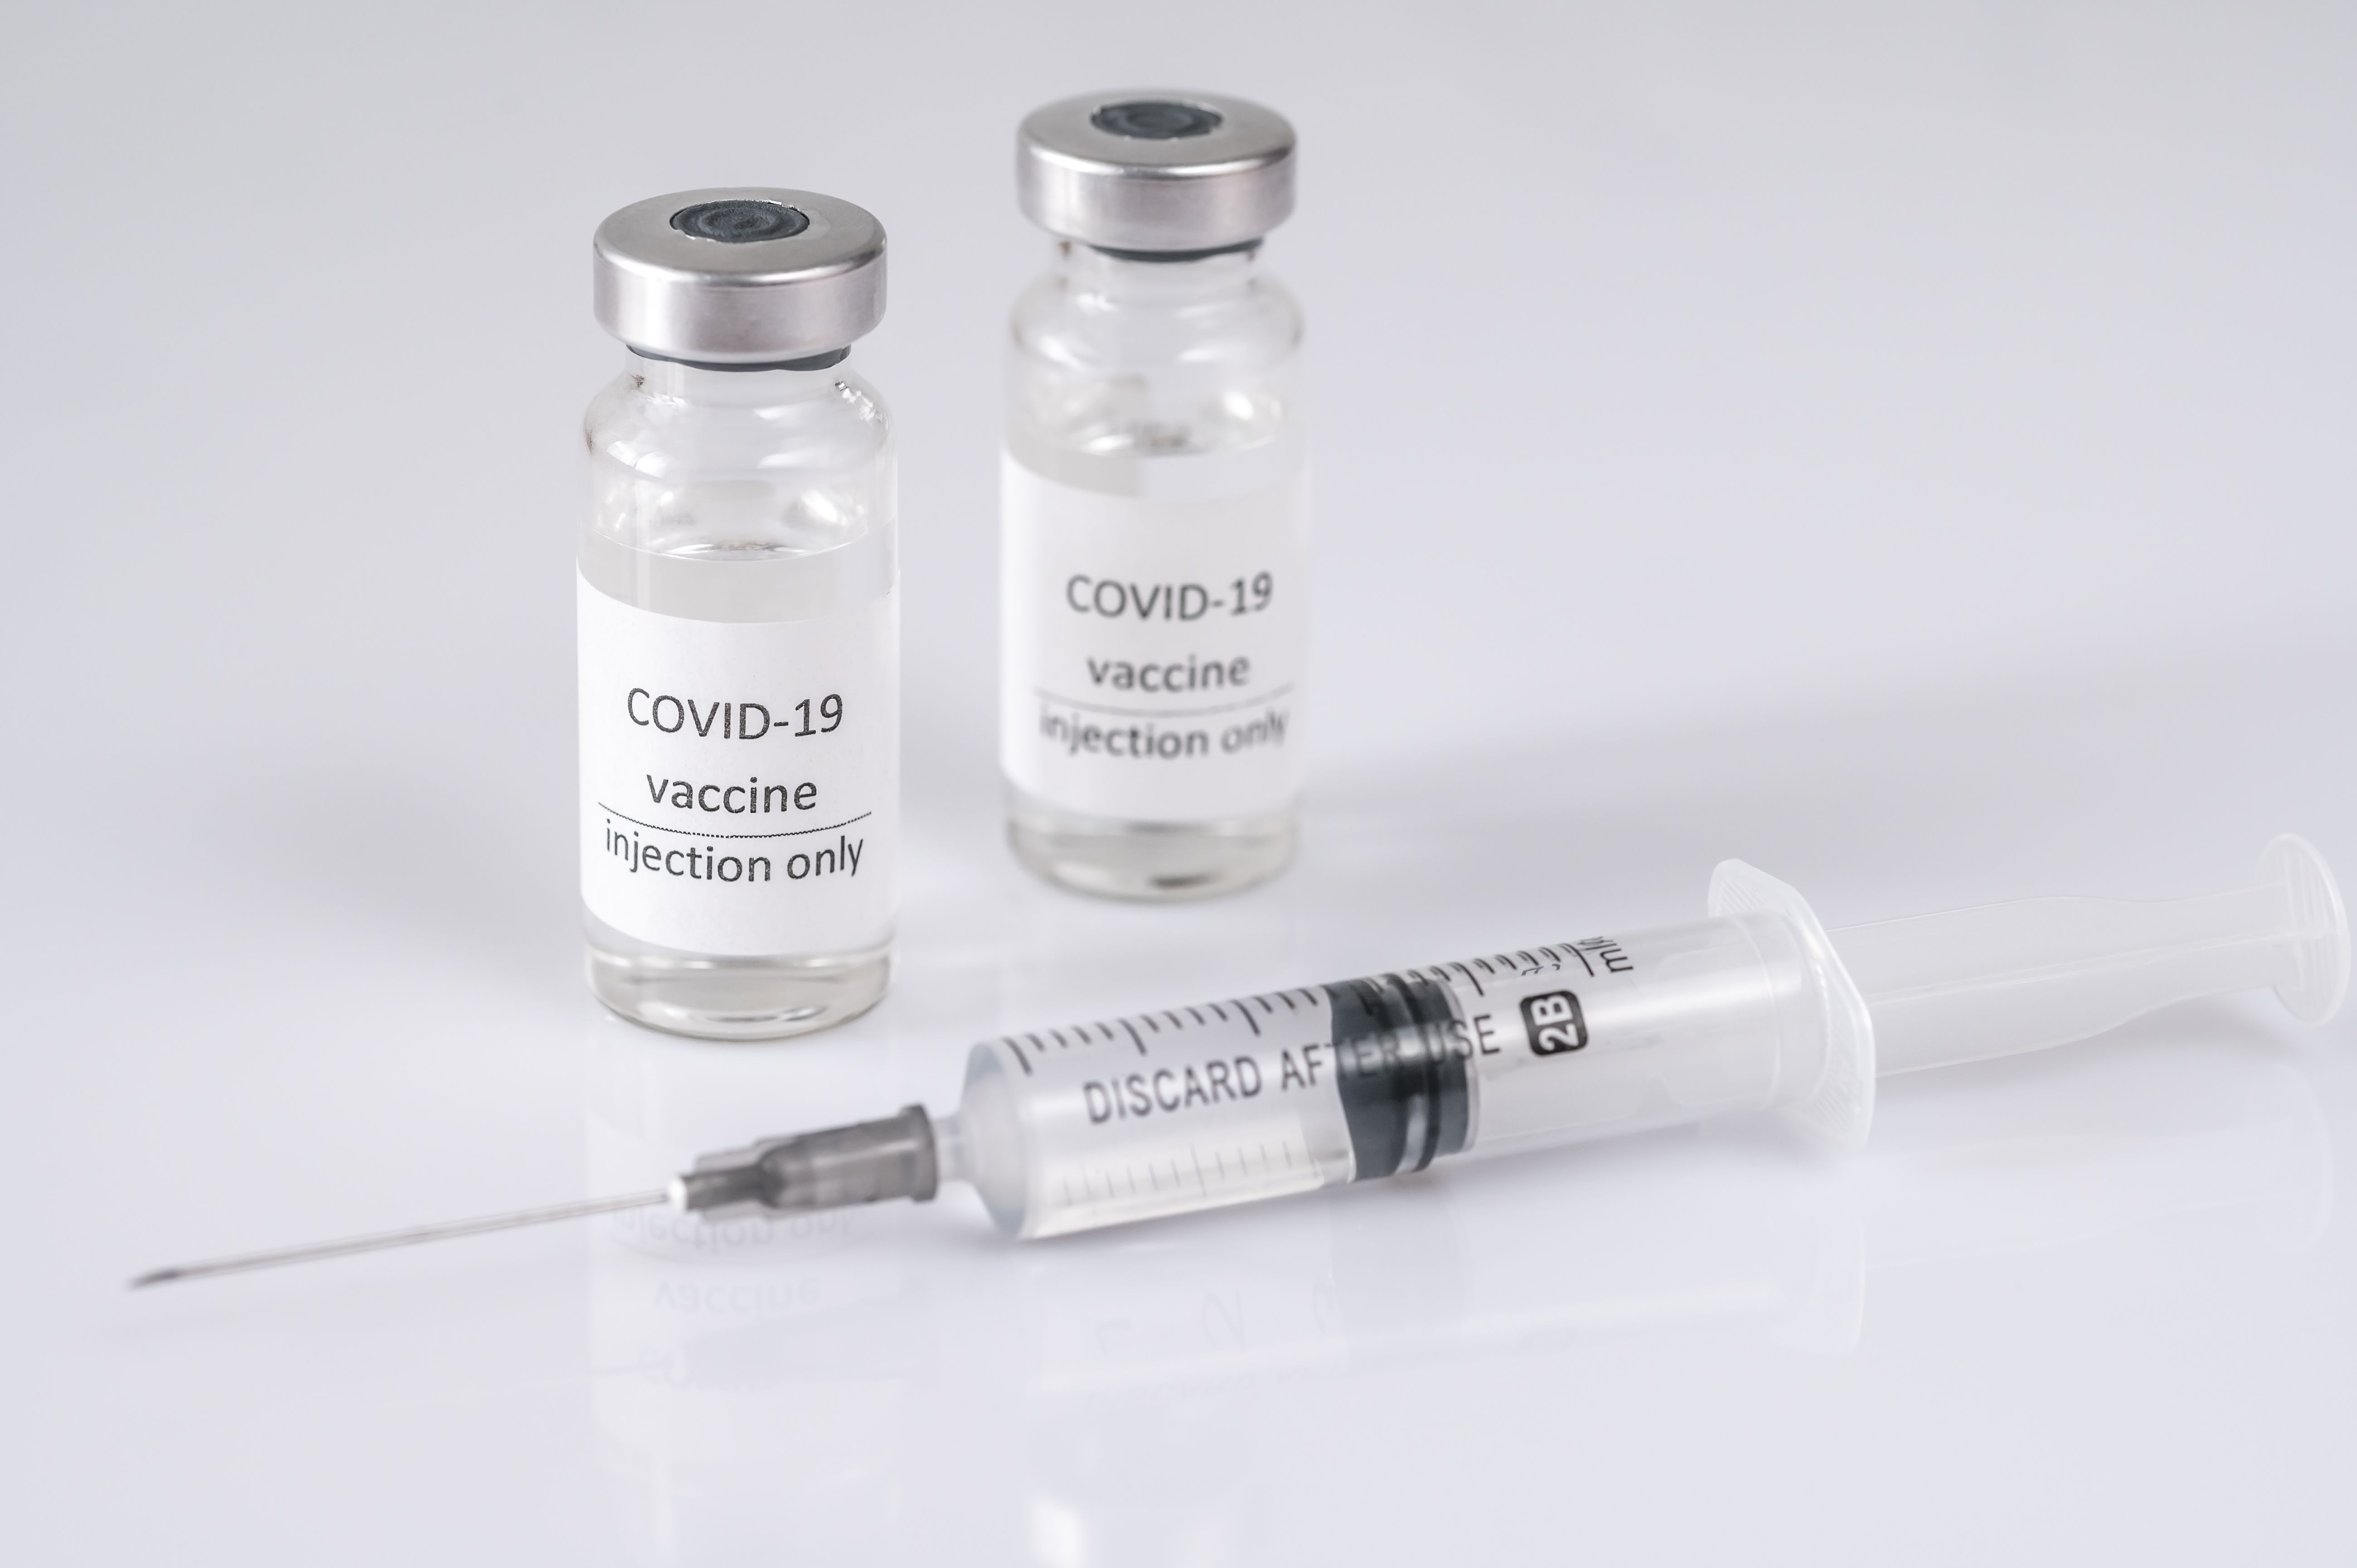 Adults living with HIV were more likely to have a breakthrough COVID-19 infection after vaccination, suggesting a need for additional vaccine doses in this population.